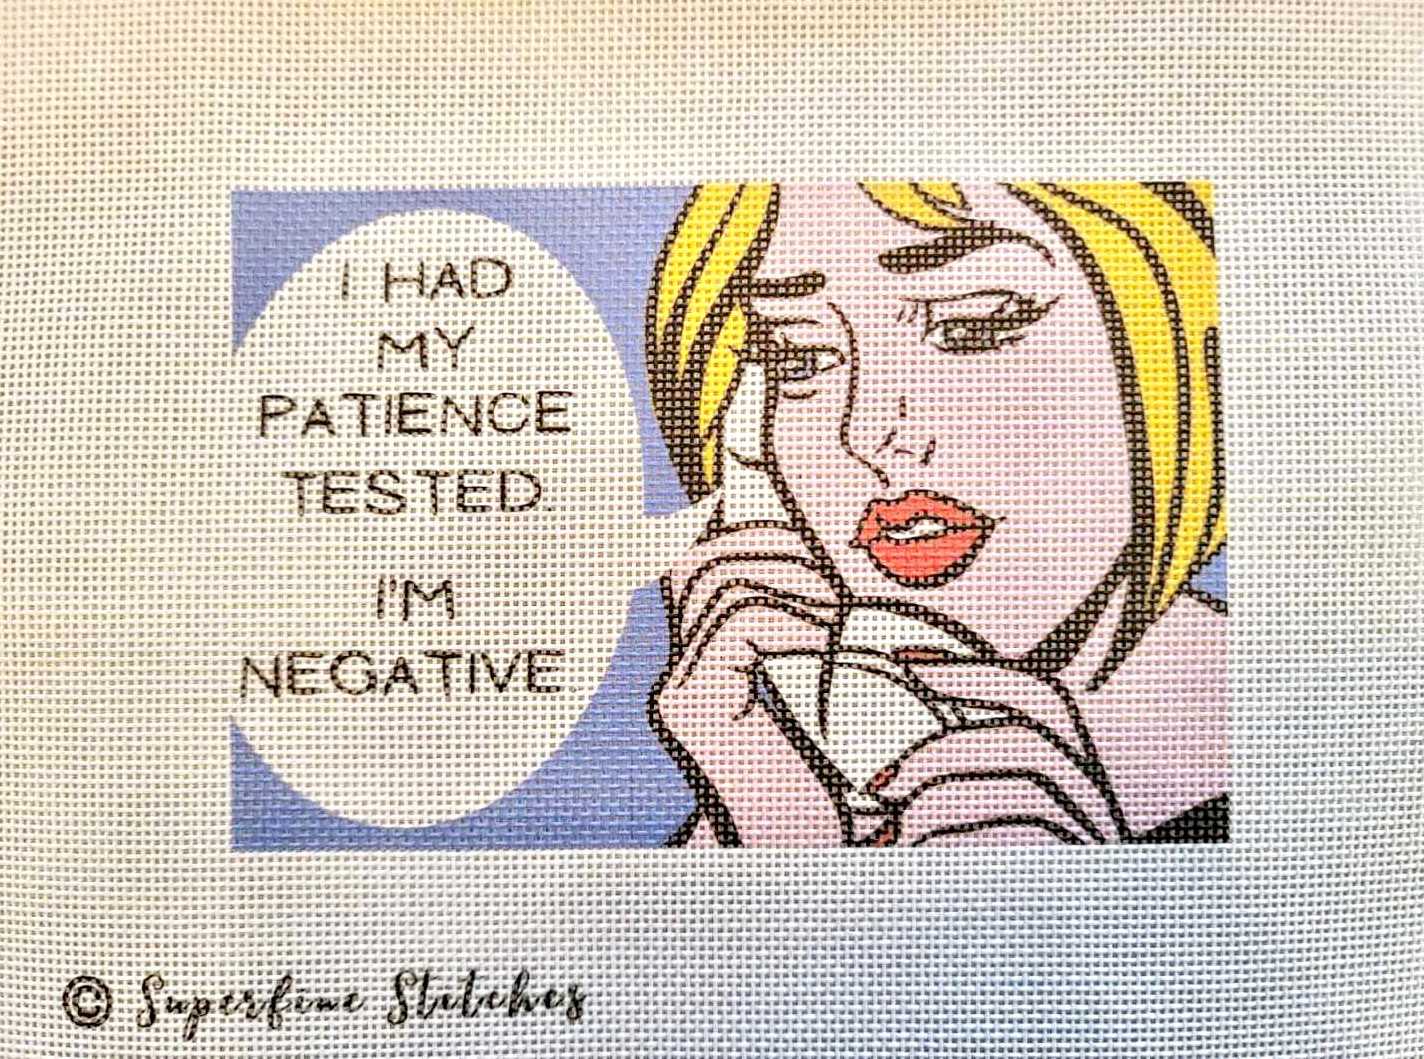 I Had My Patience Tested needlepoint kit with silk threads, 6&quot; x 4&quot; on 18 mesh.